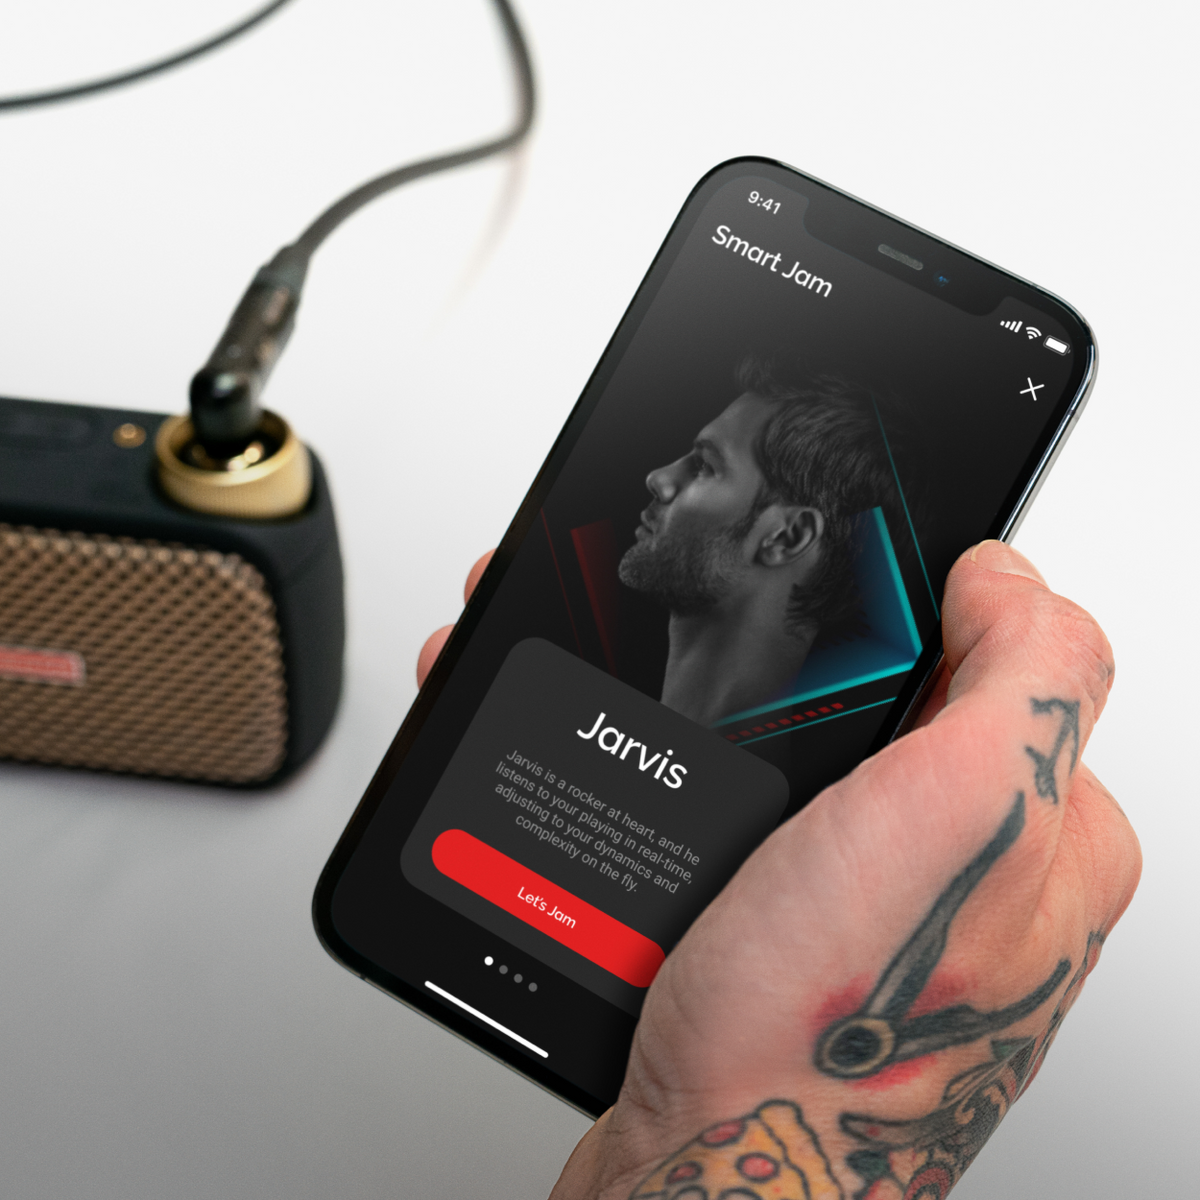 Gift the Spark GO mini smart guitar amp and Bluetooth speaker at